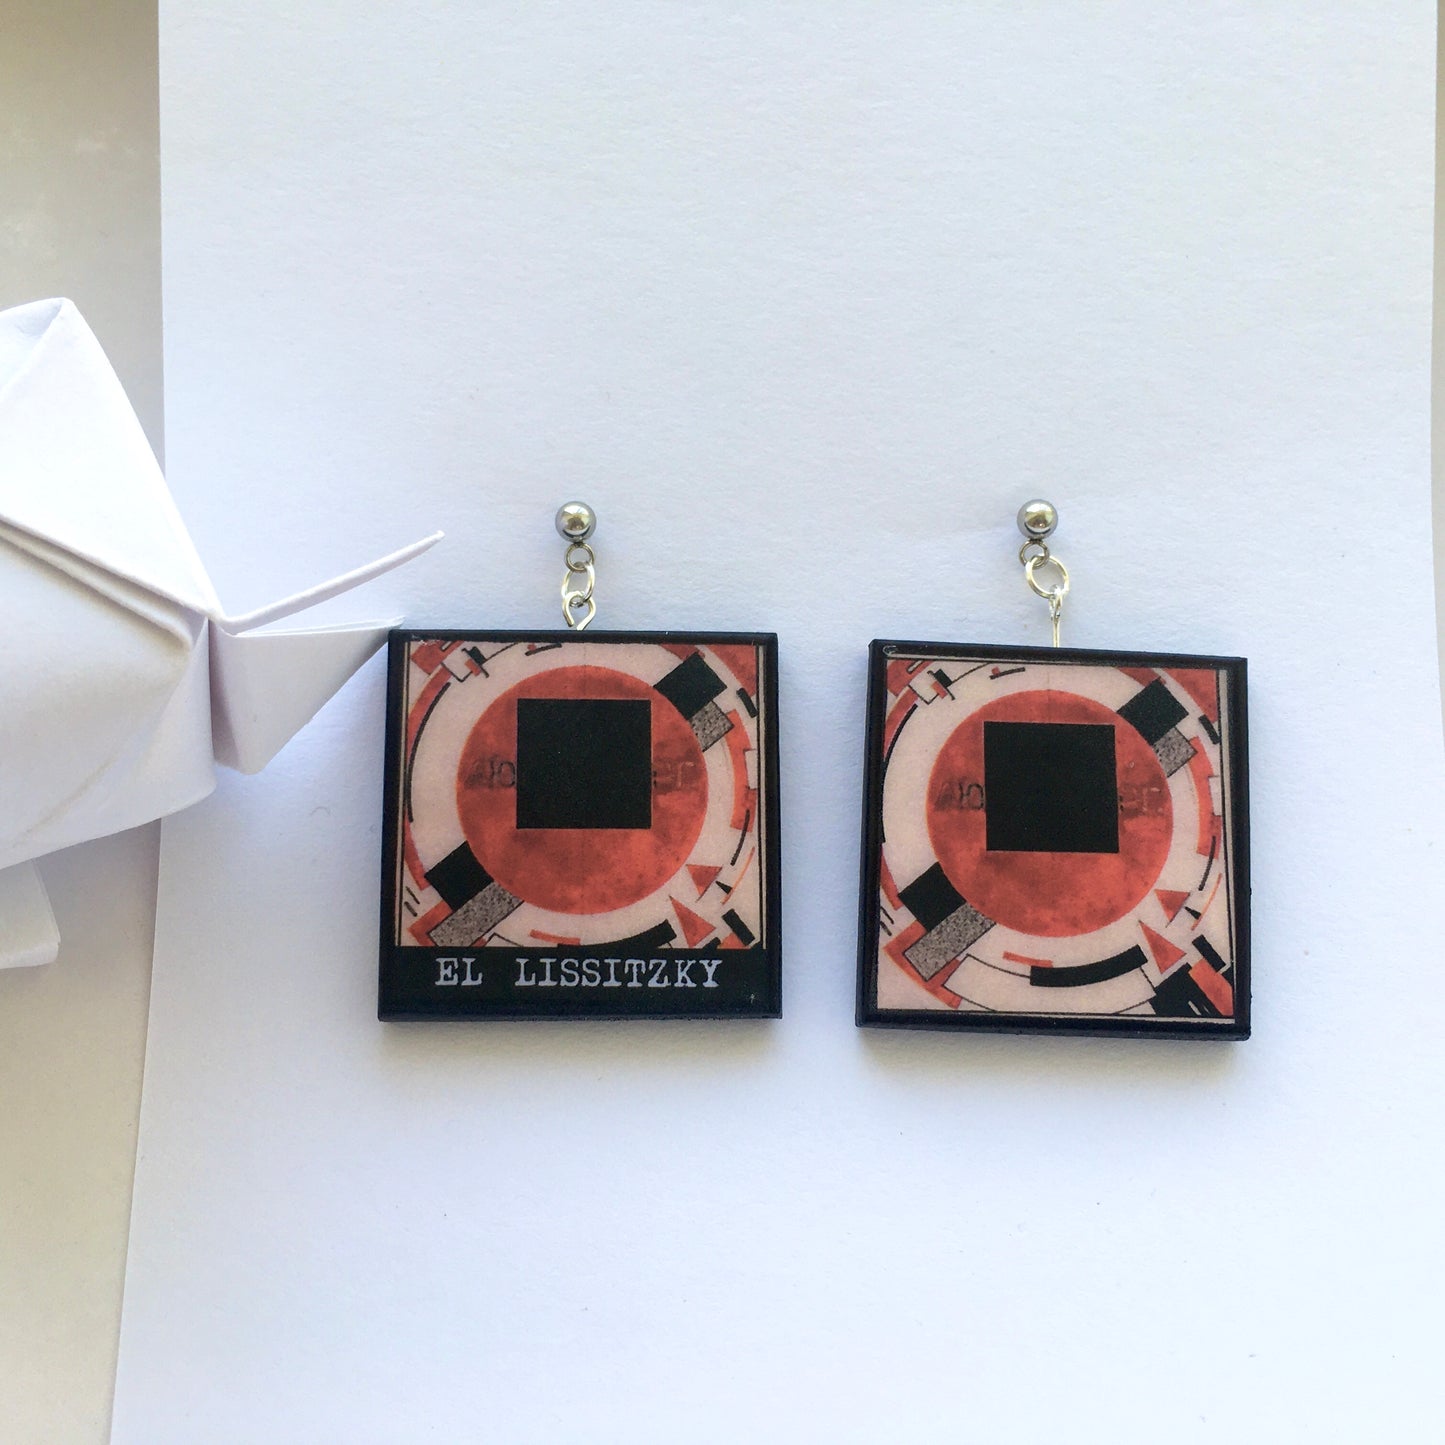 El Lissitzky earrings, Rosa Luxemburg monument project